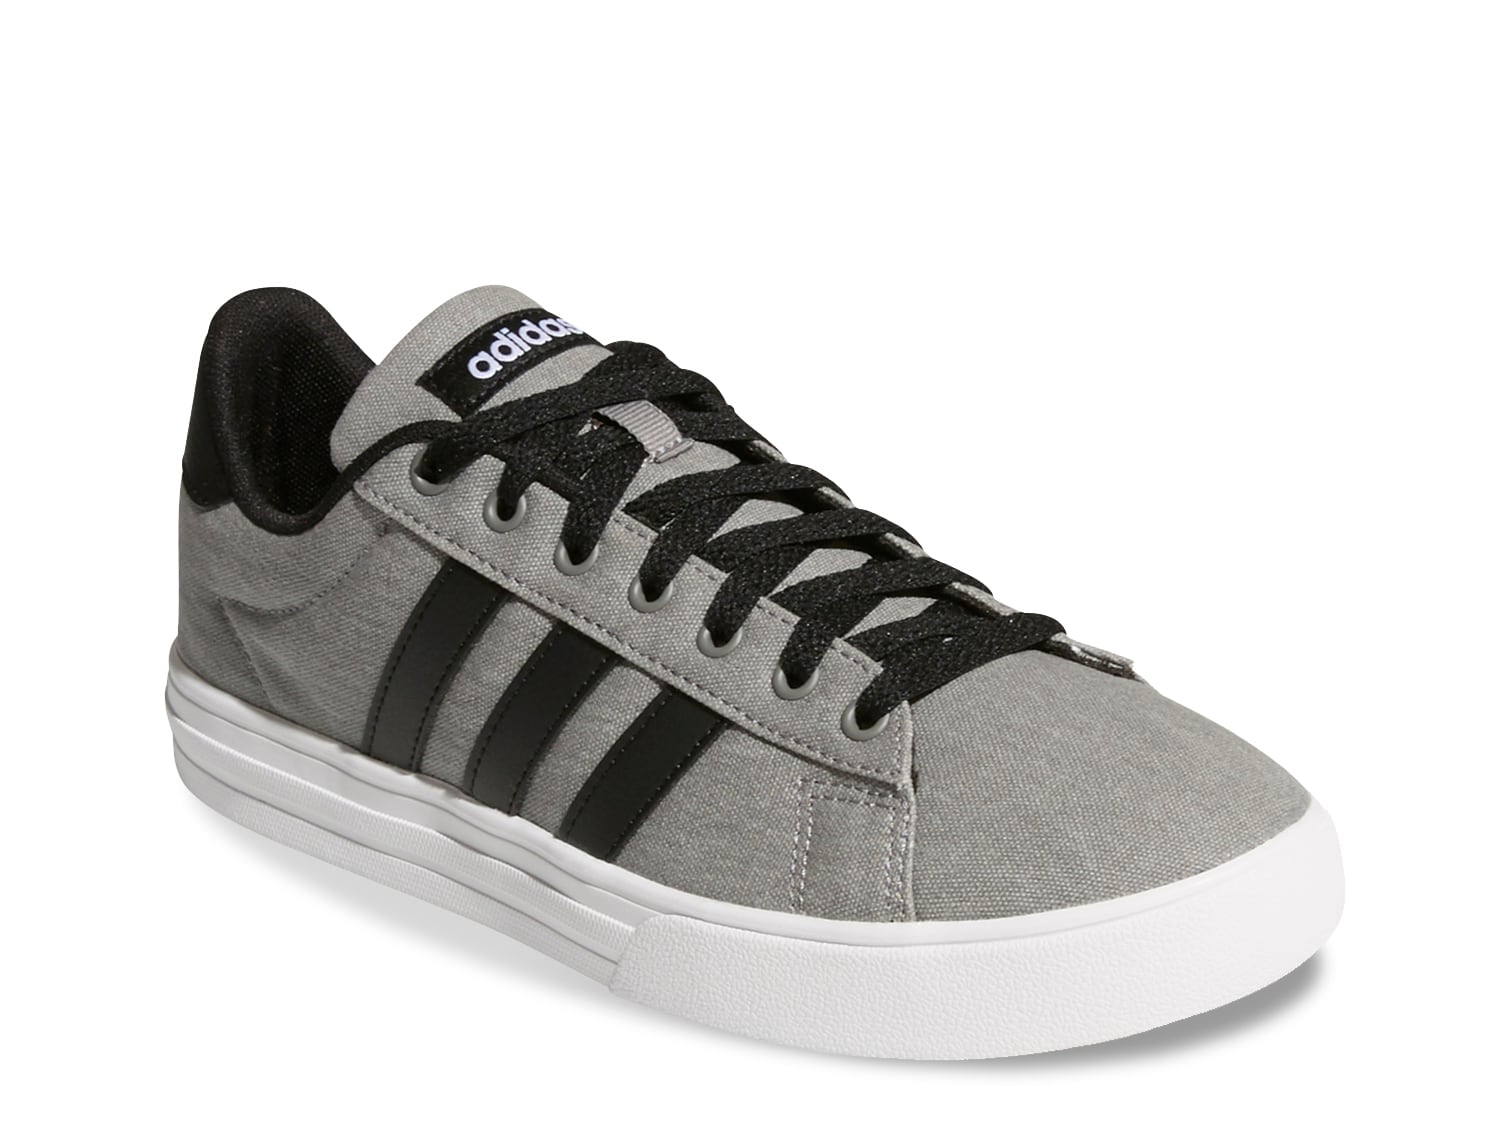 Torment harpoon anywhere adidas Daily 2.0 Sneaker - Men's - Free Shipping | DSW